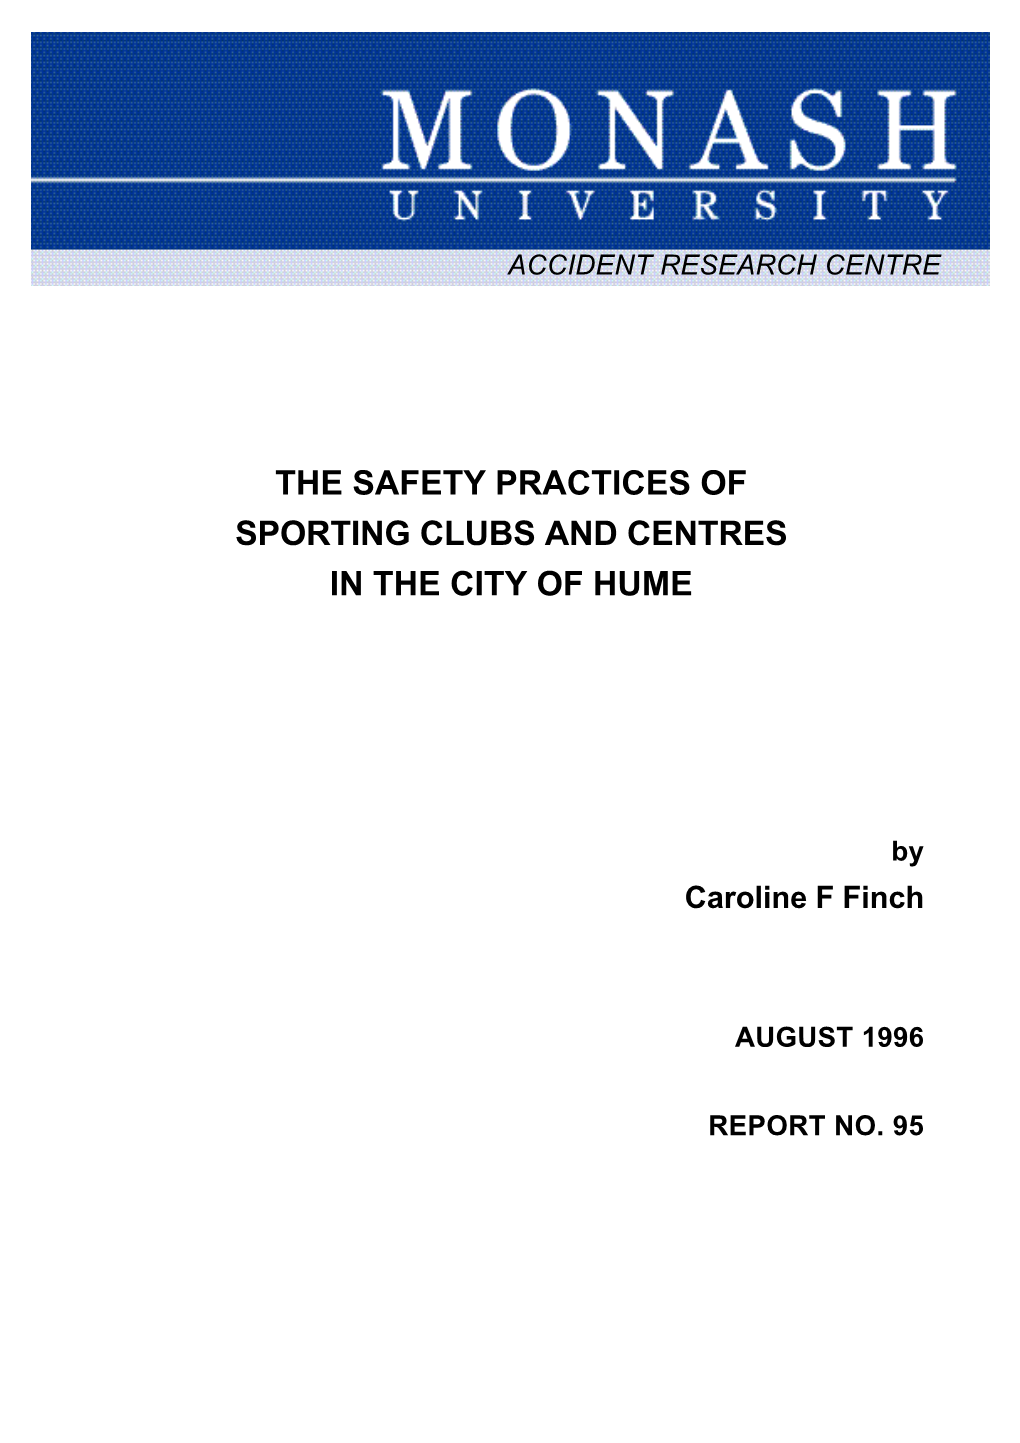 Safety Practices of Sporting Clubs & Centres in the City of Hume